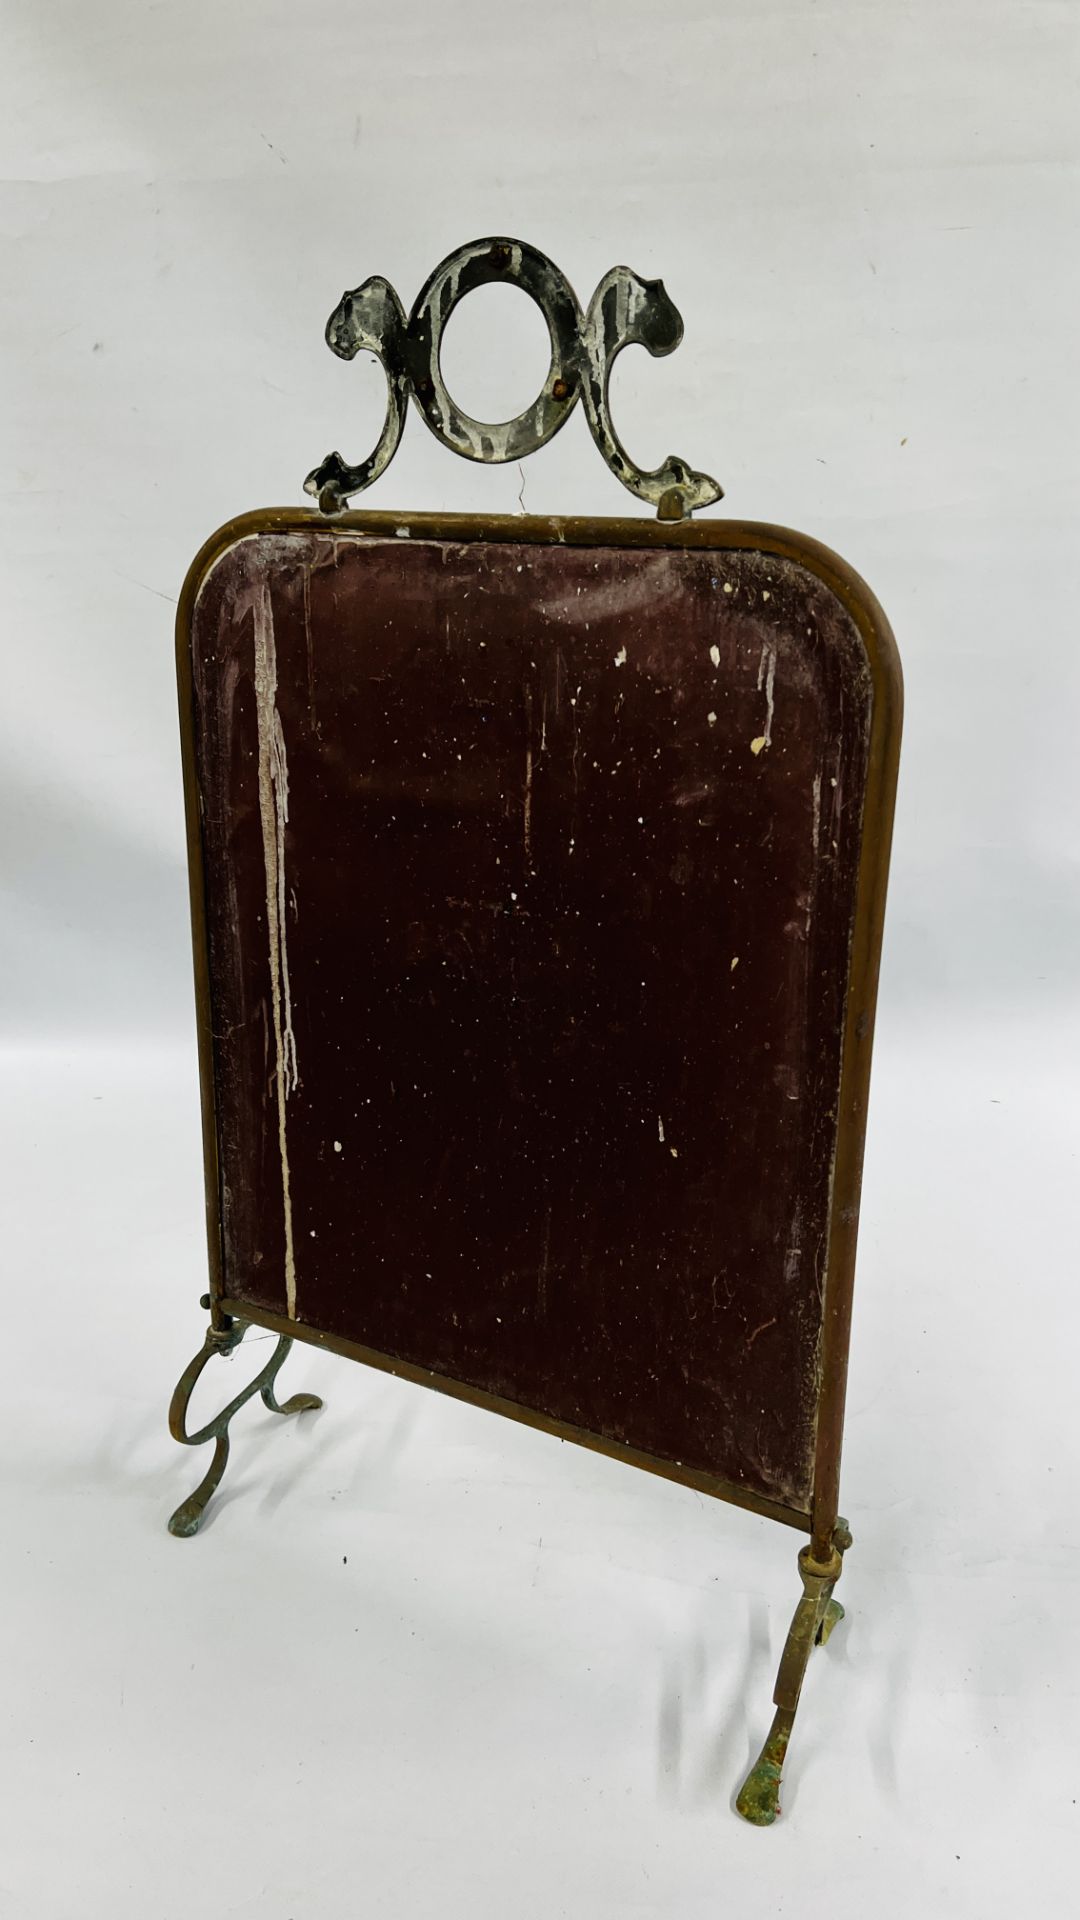 ANTIQUE BRASS FRAMED FIRE SCREEN WITH BEVELLED MIRROR INSERT PRESSED DETAIL. - Image 8 of 8